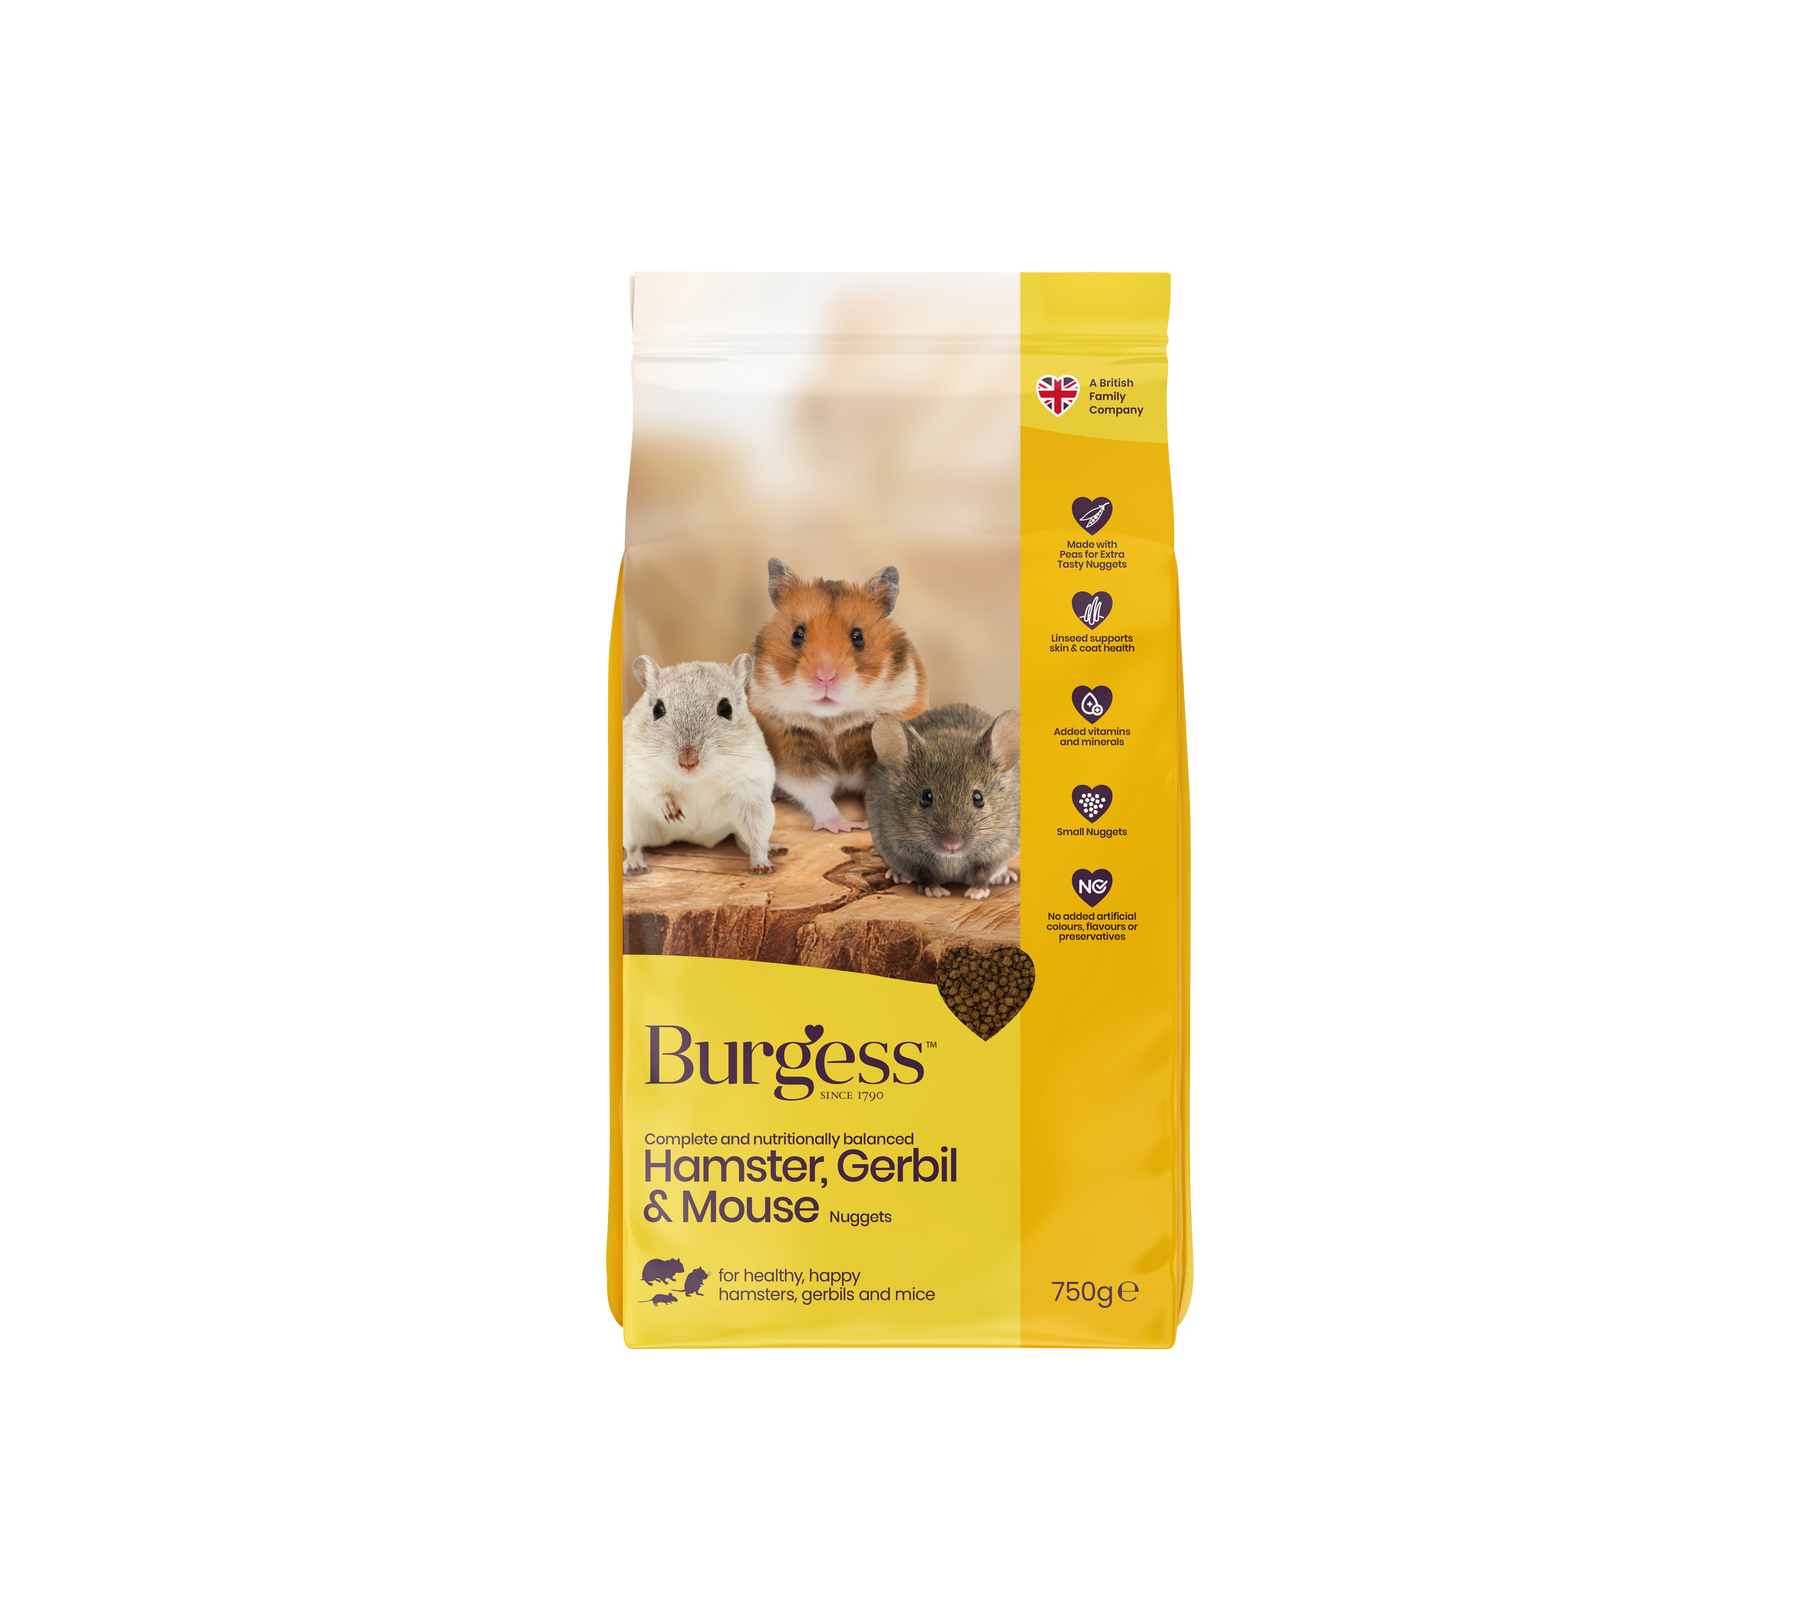 Burgess Hamster, Gerbil & Mouse Nuggets 750g